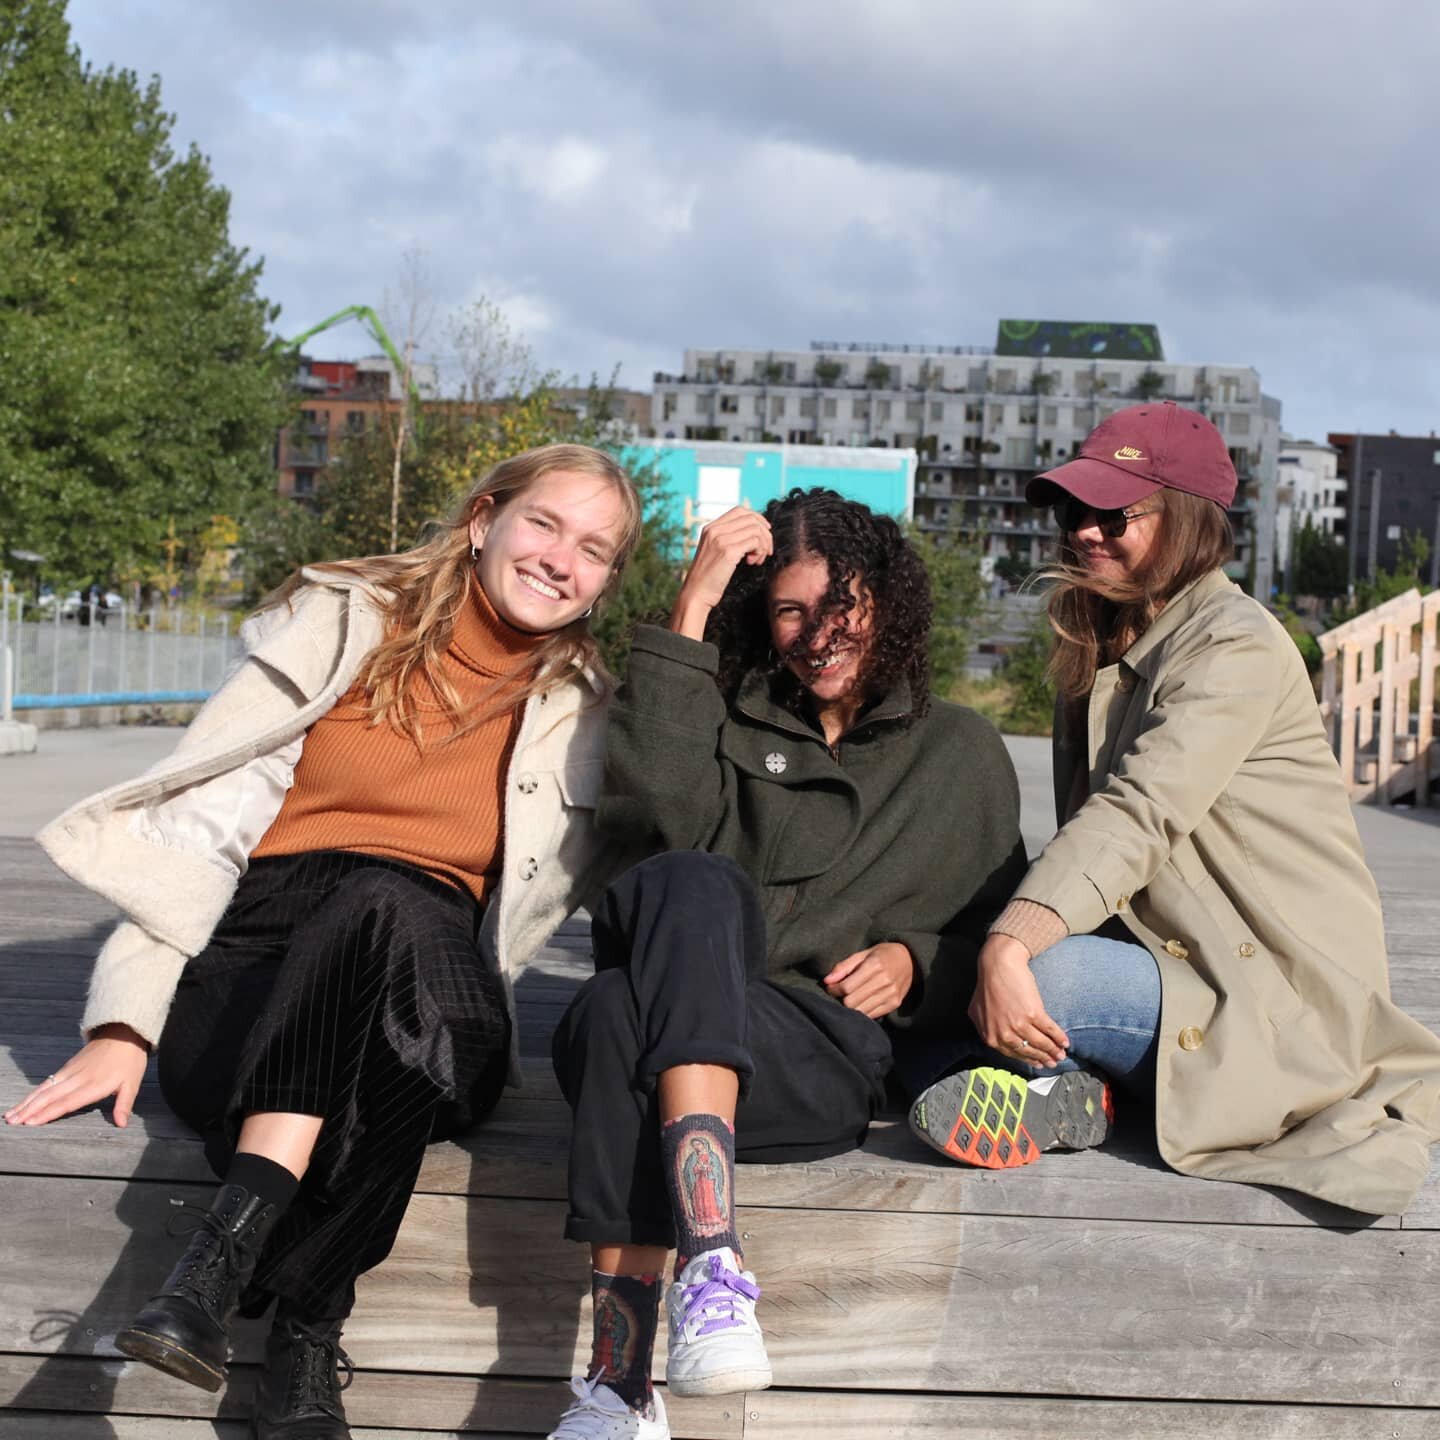 Introducing this years crew: Daniela, Joanna and Sandra. They'll be sharing their creations at @aaa.kollektiv throughout the year!